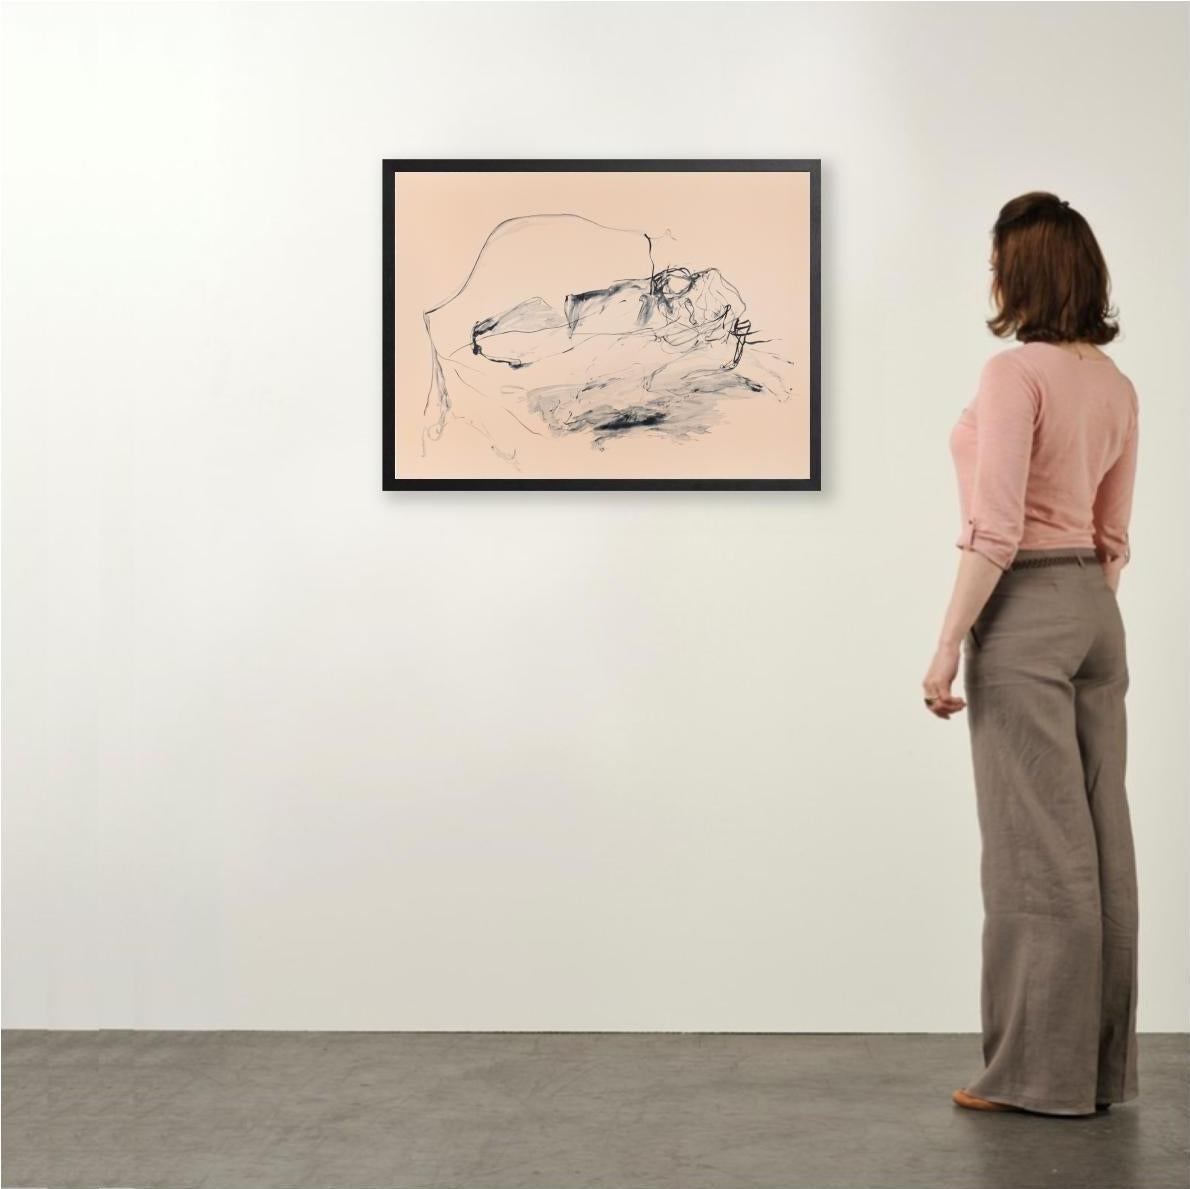 On My Knees - Emin, Contemporary, YBAs, Lithograph, Portrait, Figurative art - Young British Artists (YBA) Print by Tracey Emin